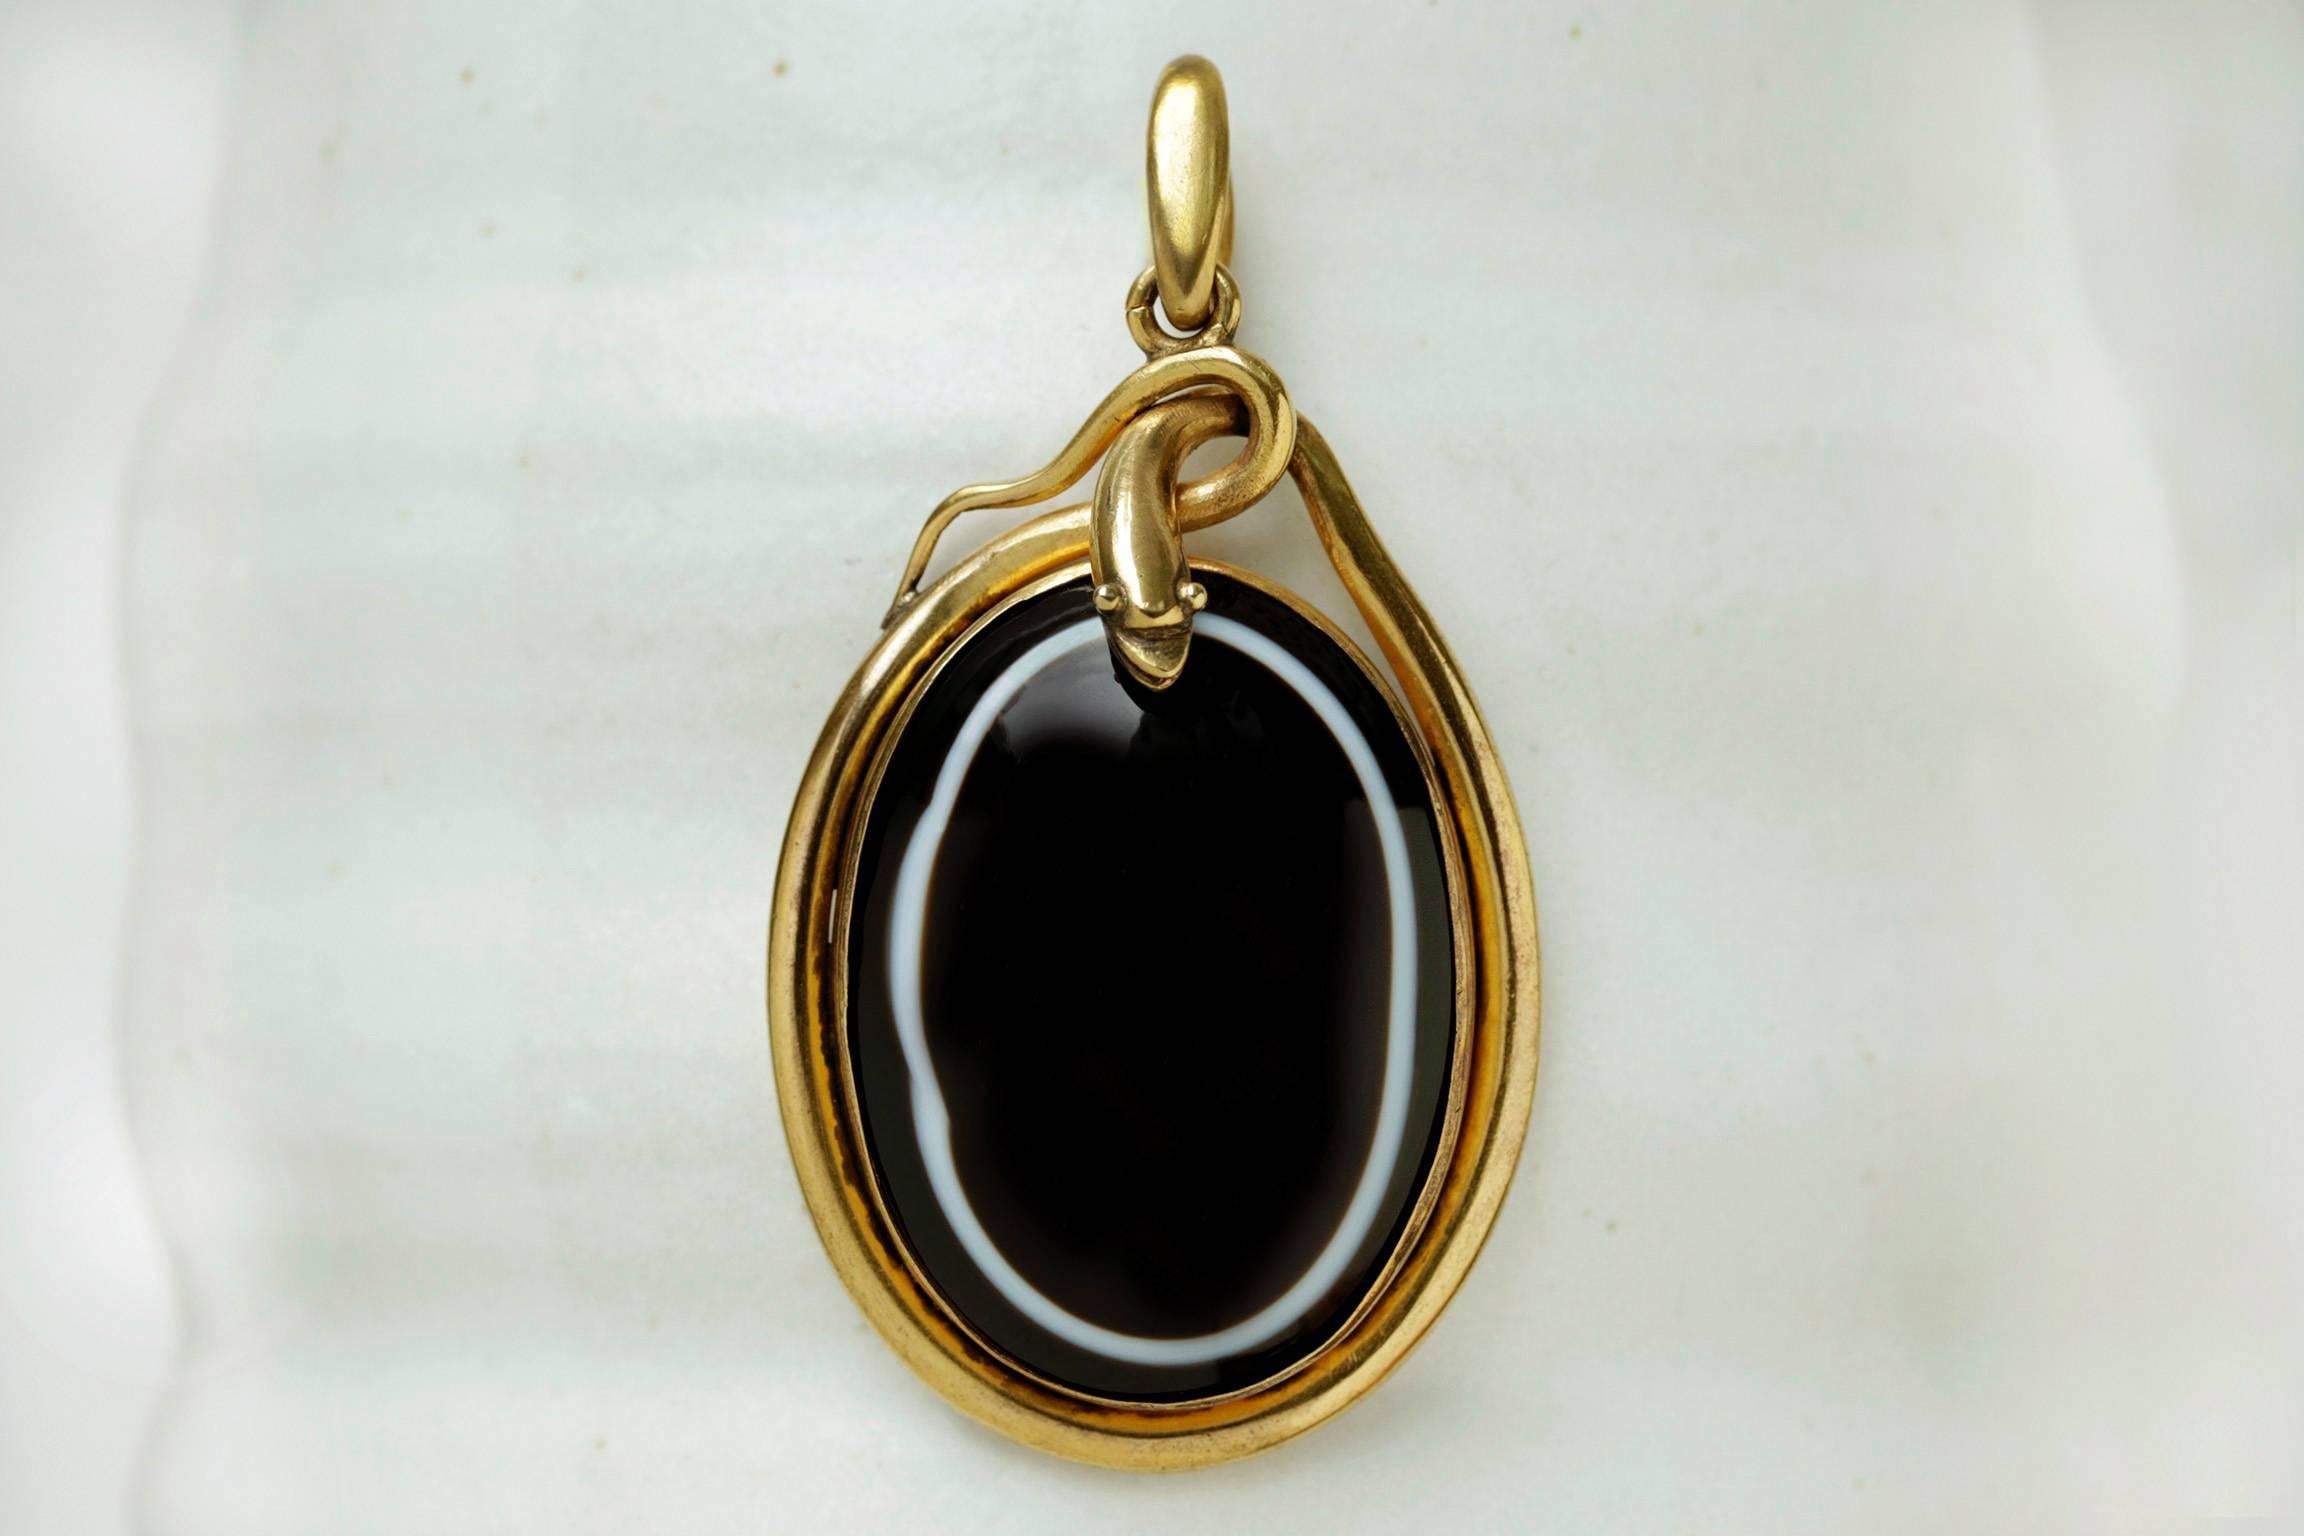 A very large Victorian banded agate snake pendant. The pendant measures approximately 2.75" h x 1.50" w. The sizable scale of the pendant provides a significantly bold and handsome appearance. It is overall in great condition without any